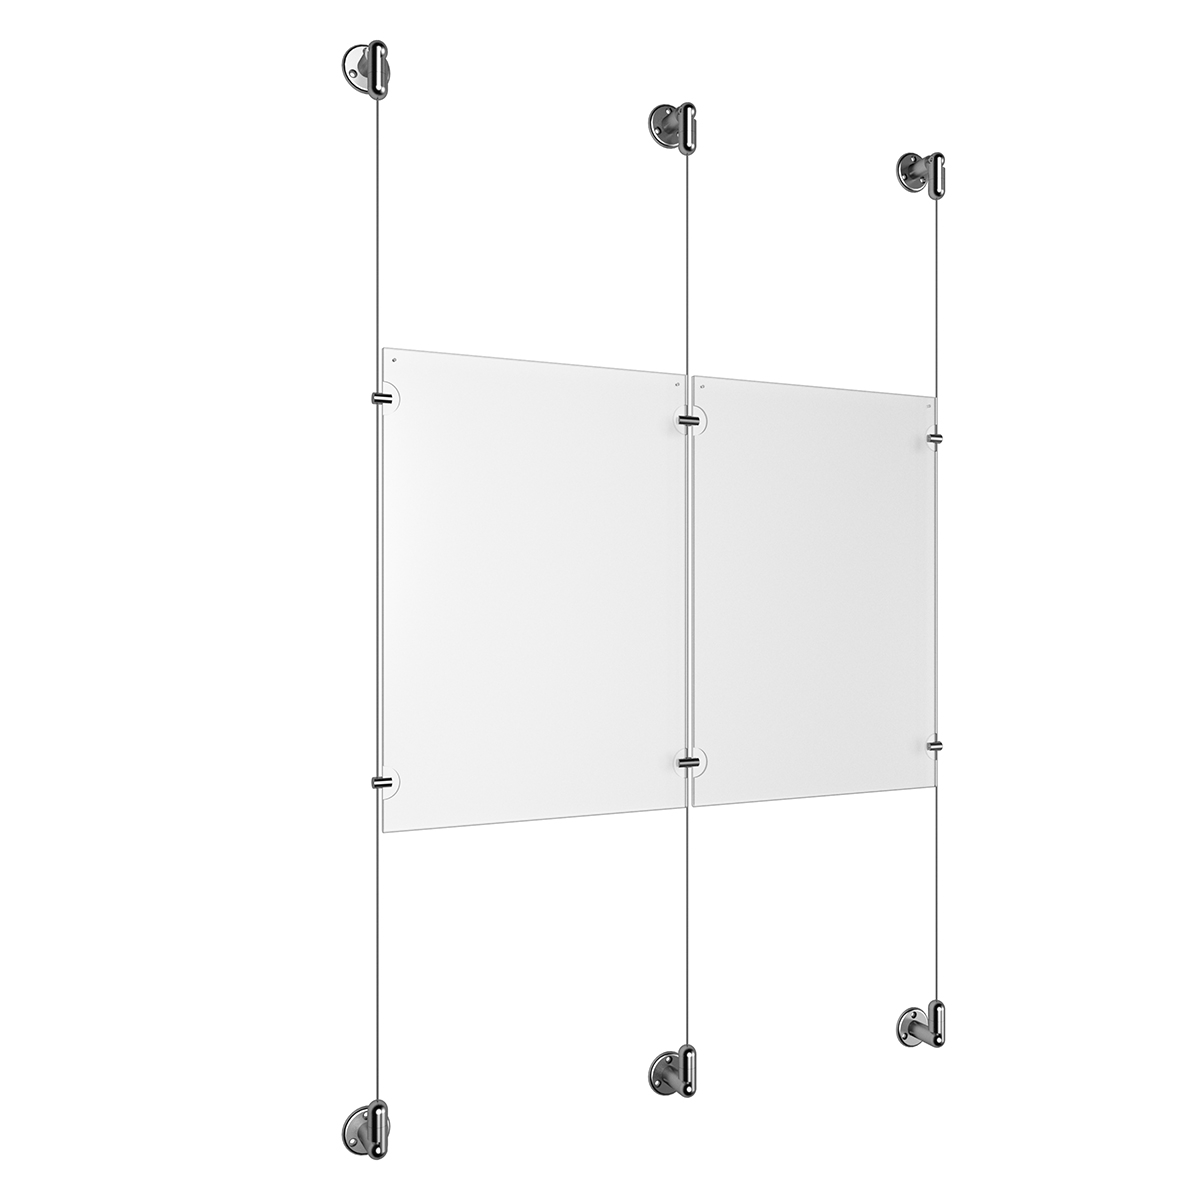 (2) 11'' Width x 17'' Height Clear Acrylic Frame & (3) Aluminum Clear Anodized Adjustable Angle Cable Systems with (4) Single-Sided Panel Grippers (2) Double-Sided Panel Grippers